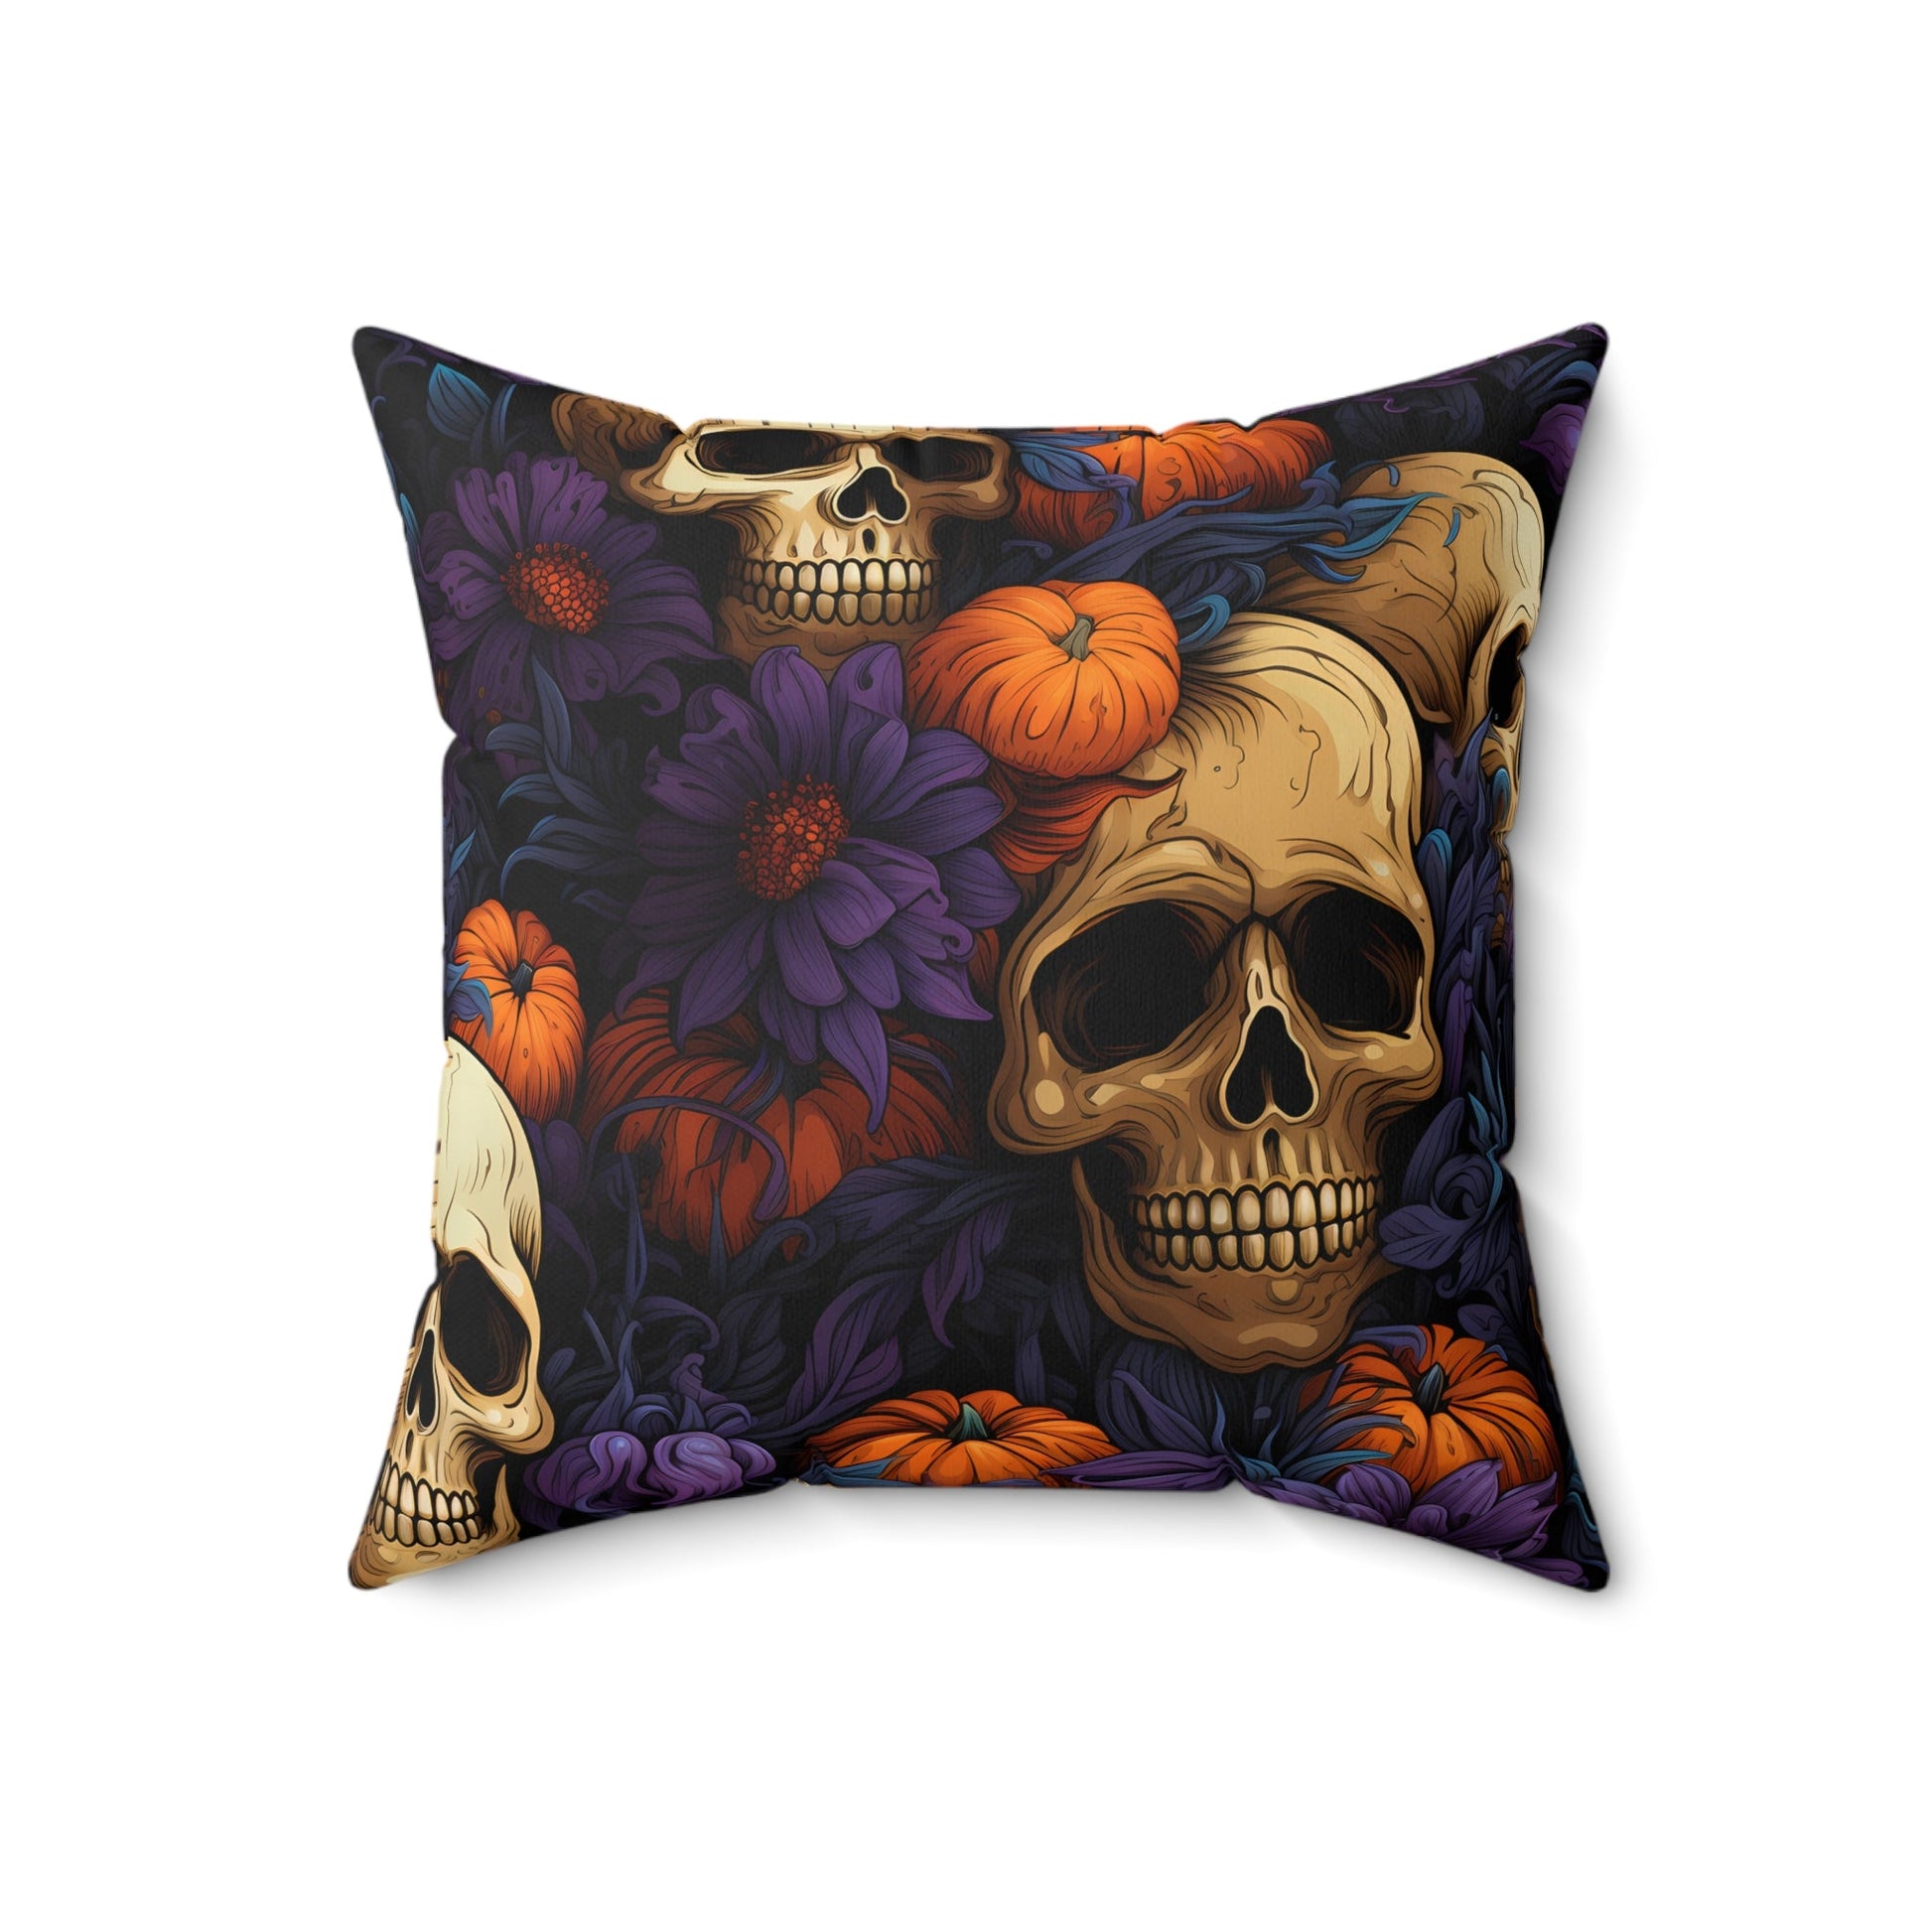 Floral Skulls and Pumpkins Square PillowHome DecorVTZdesigns16" × 16"All Over PrintAOPbaroque